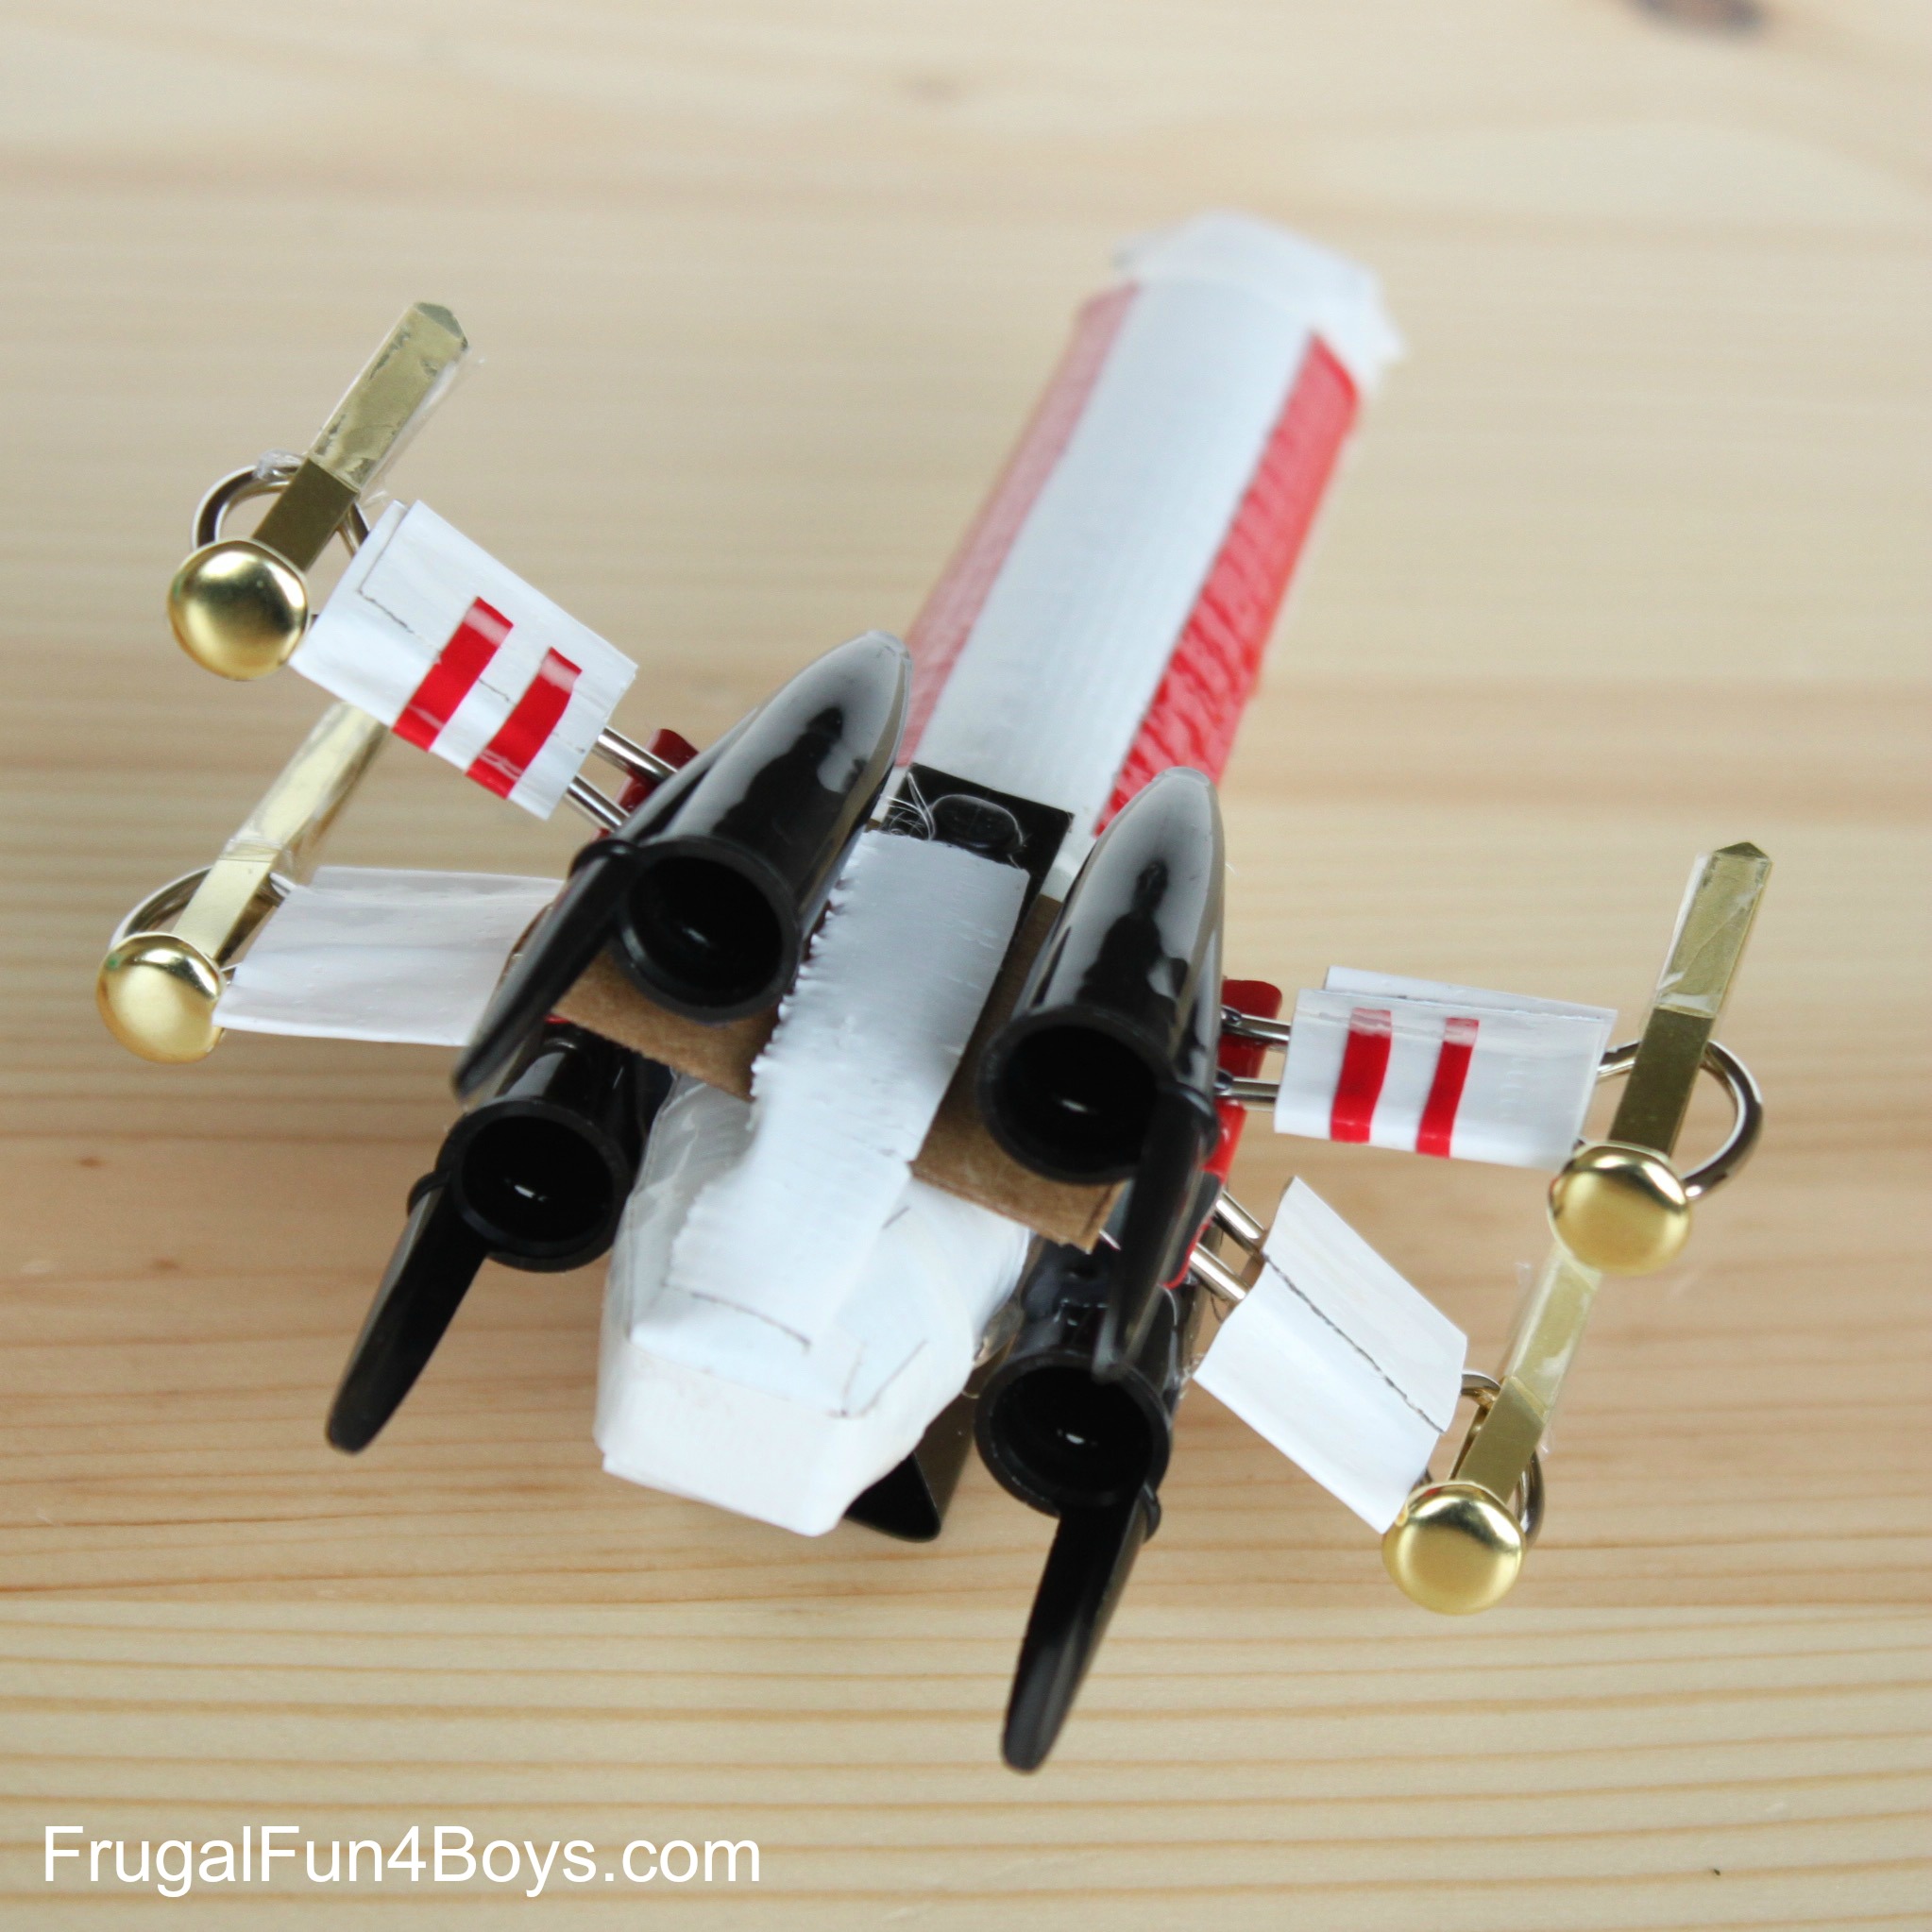 How to Build a Star Wars X-Wing out of Office Supplies